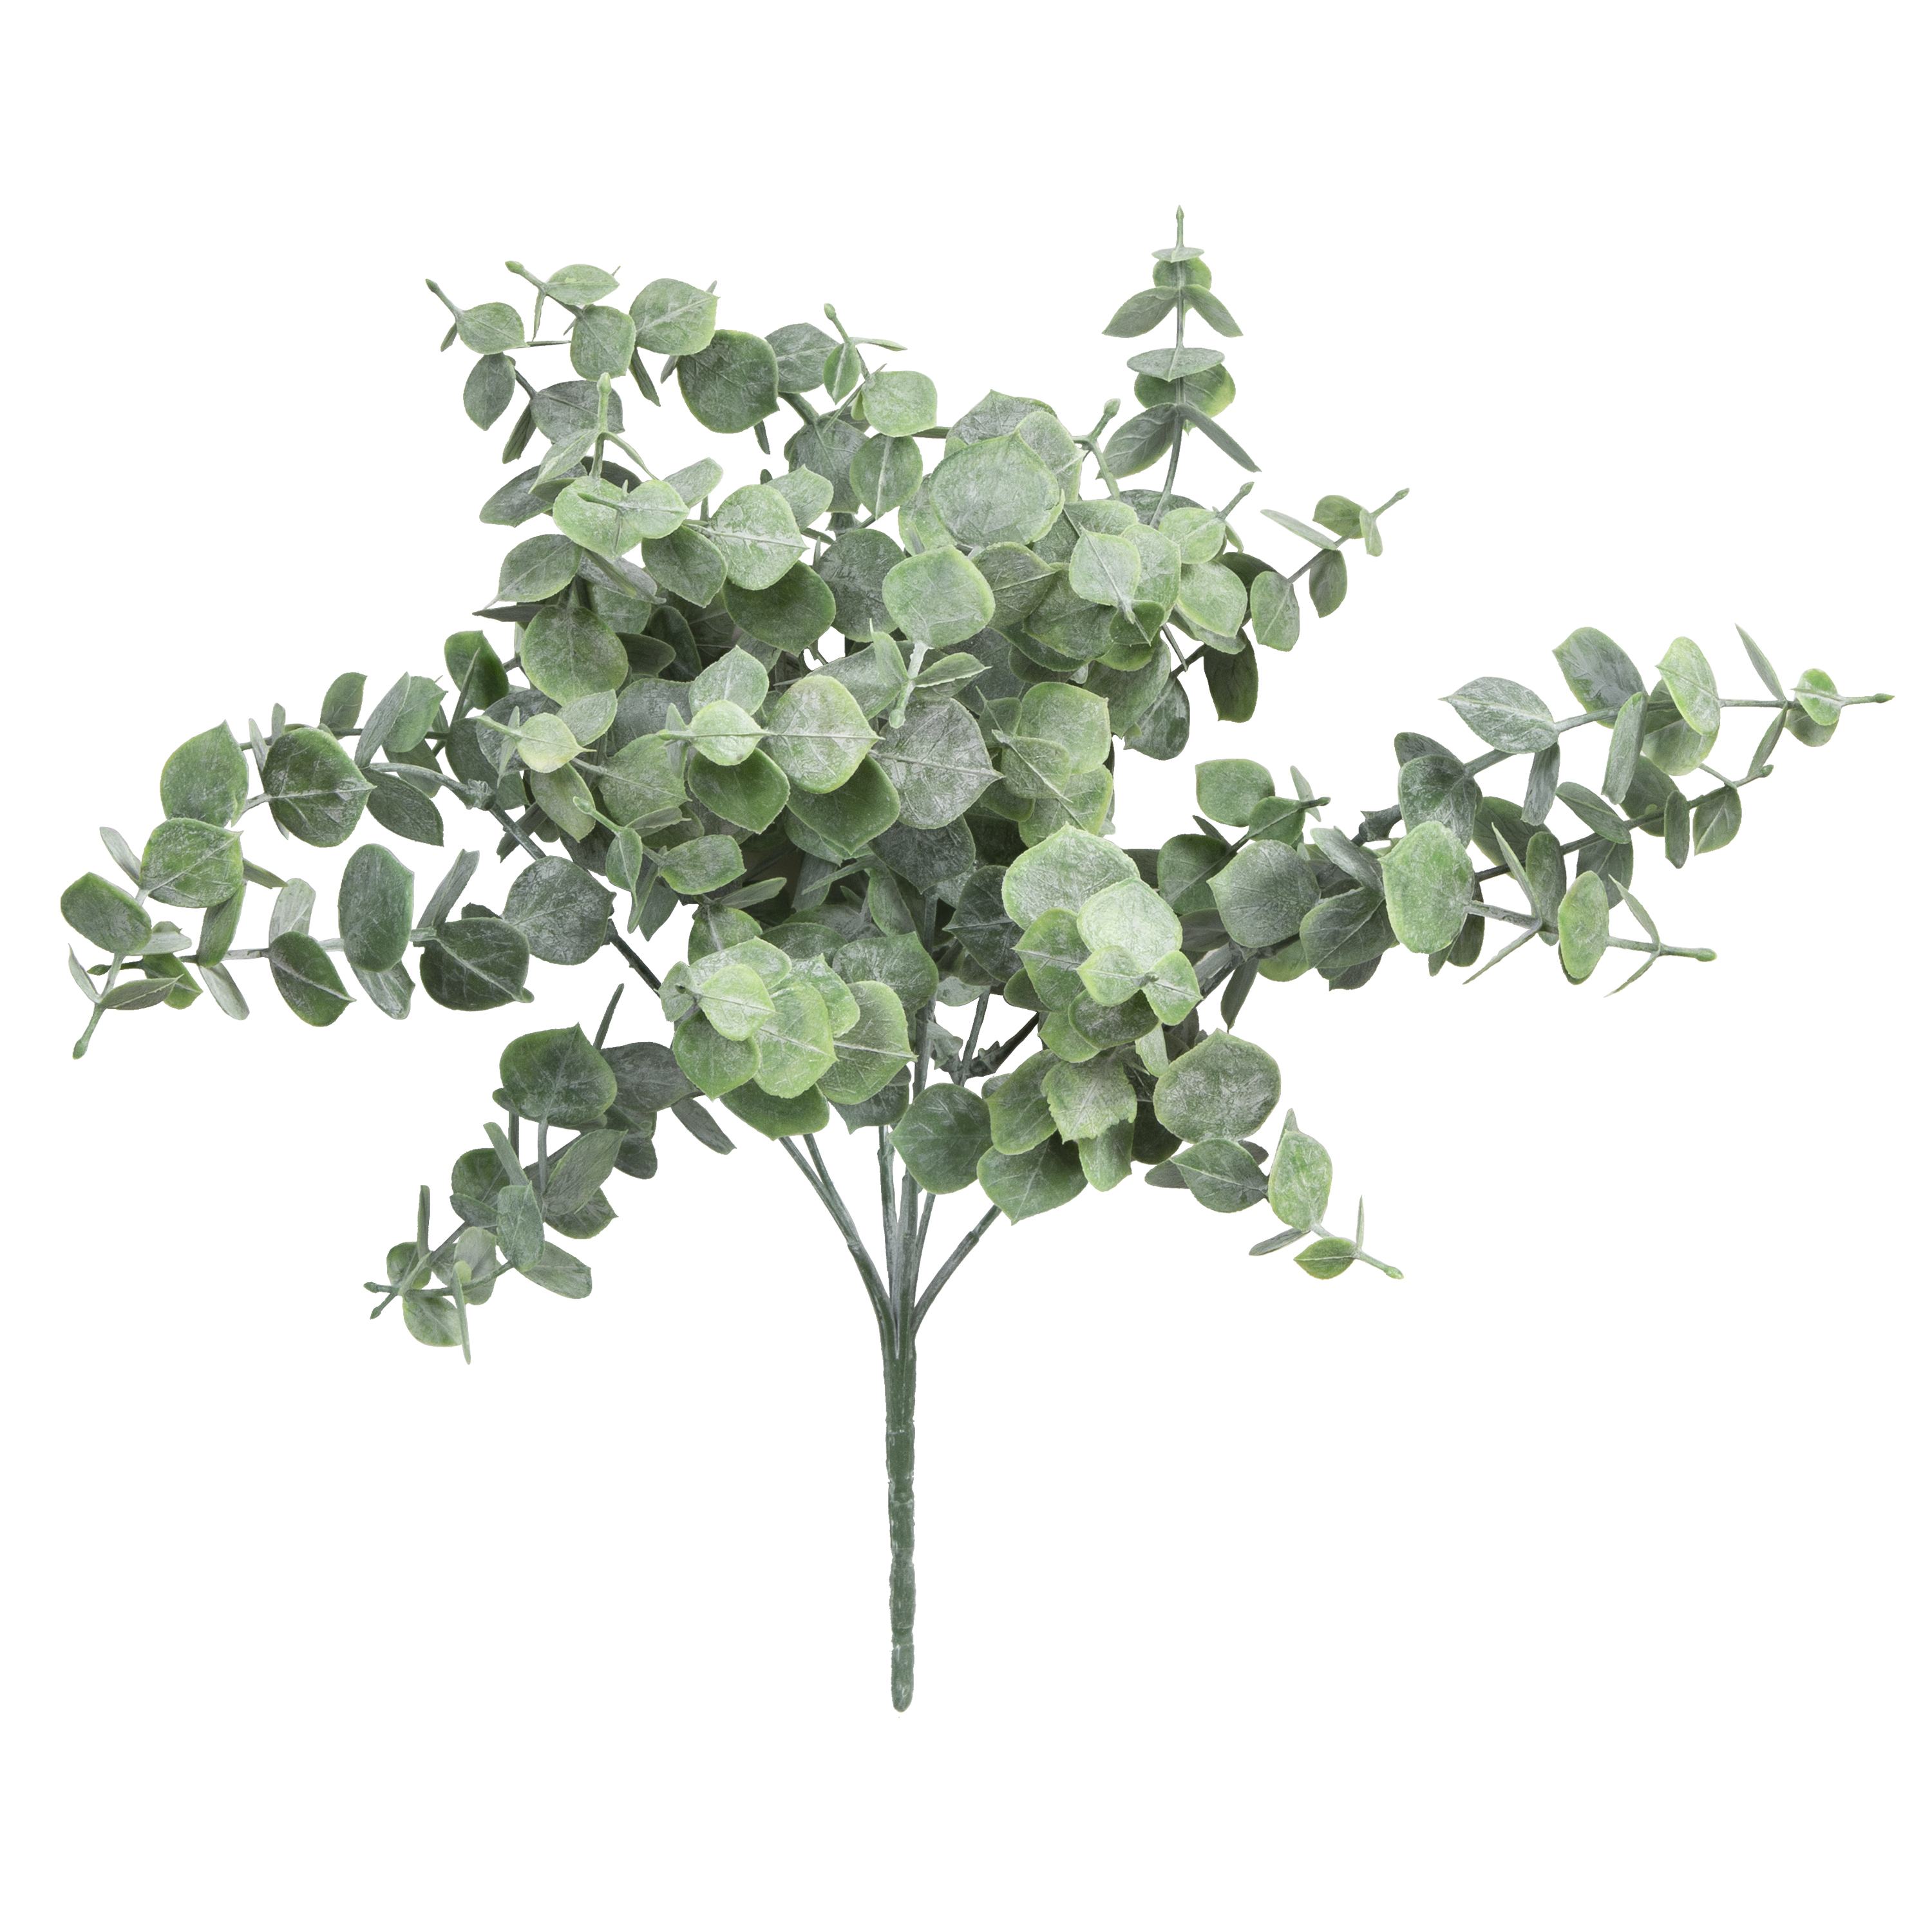 Mainstays Artificial Plants, 14" Flocked Green Eucalyptus Pick - image 1 of 5